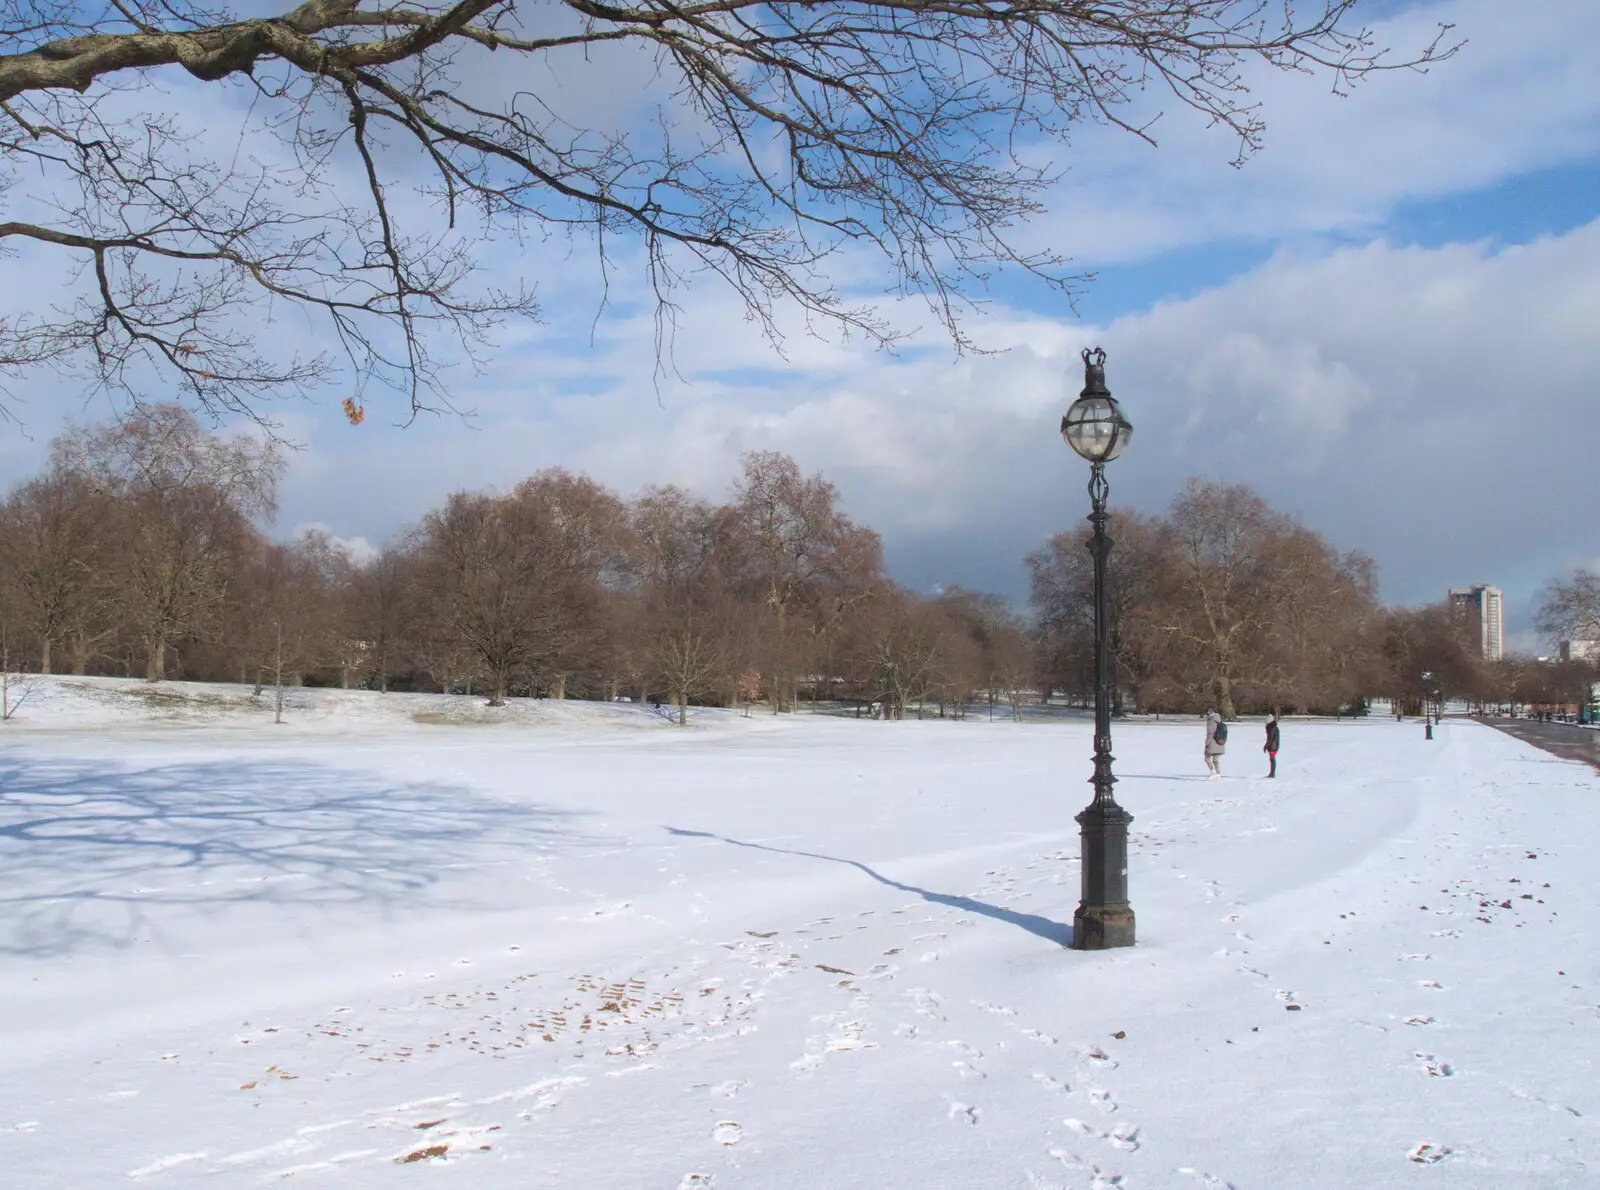 A snowy Hyde Park, from Snowmageddon: The Beast From the East, Suffolk and London - 27th February 2018